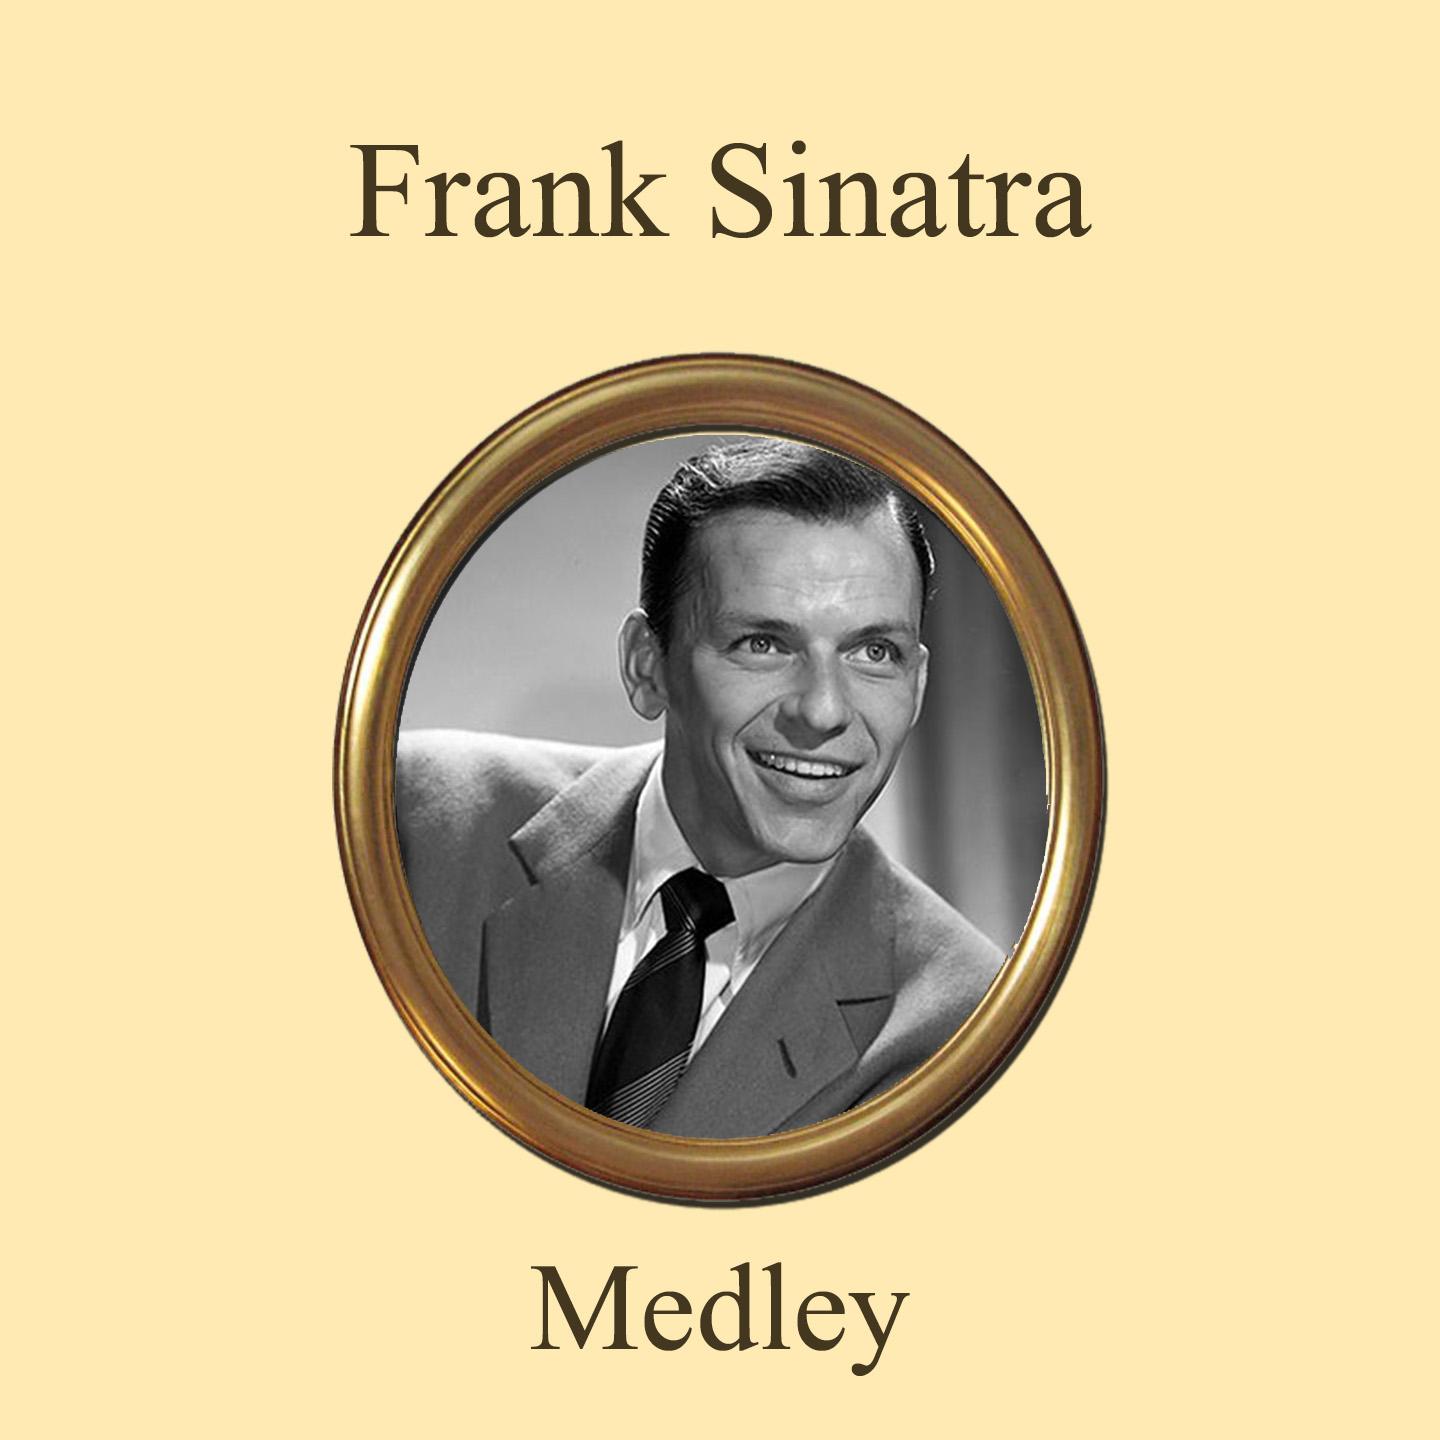 Frank Sinatra Definitive Collection In Medley